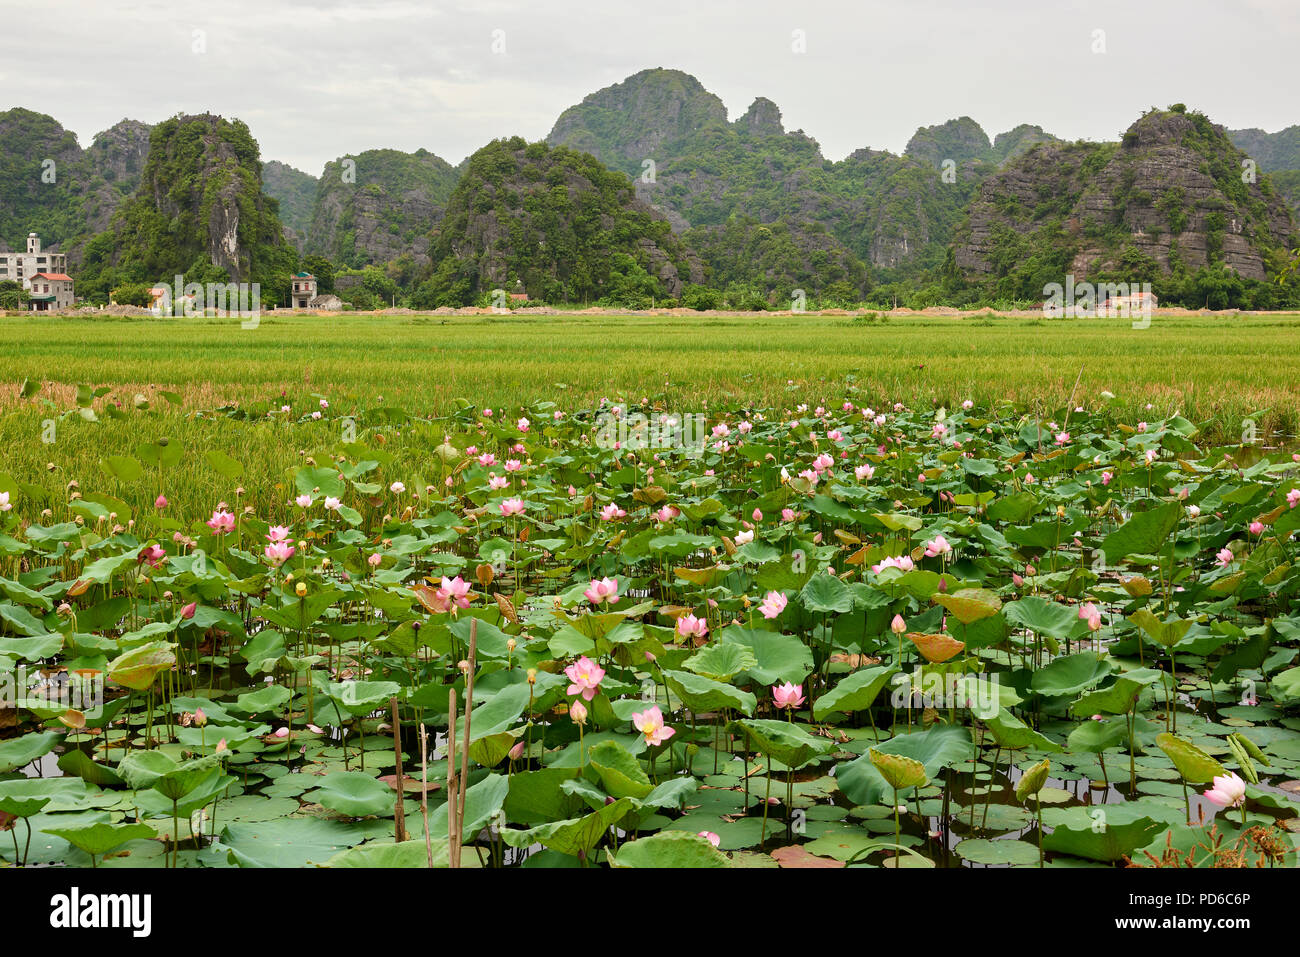 Image of a plain field on a cloudy day with water lotus, also called sacred lotus, in the foreground and mountains in the background. Stock Photo